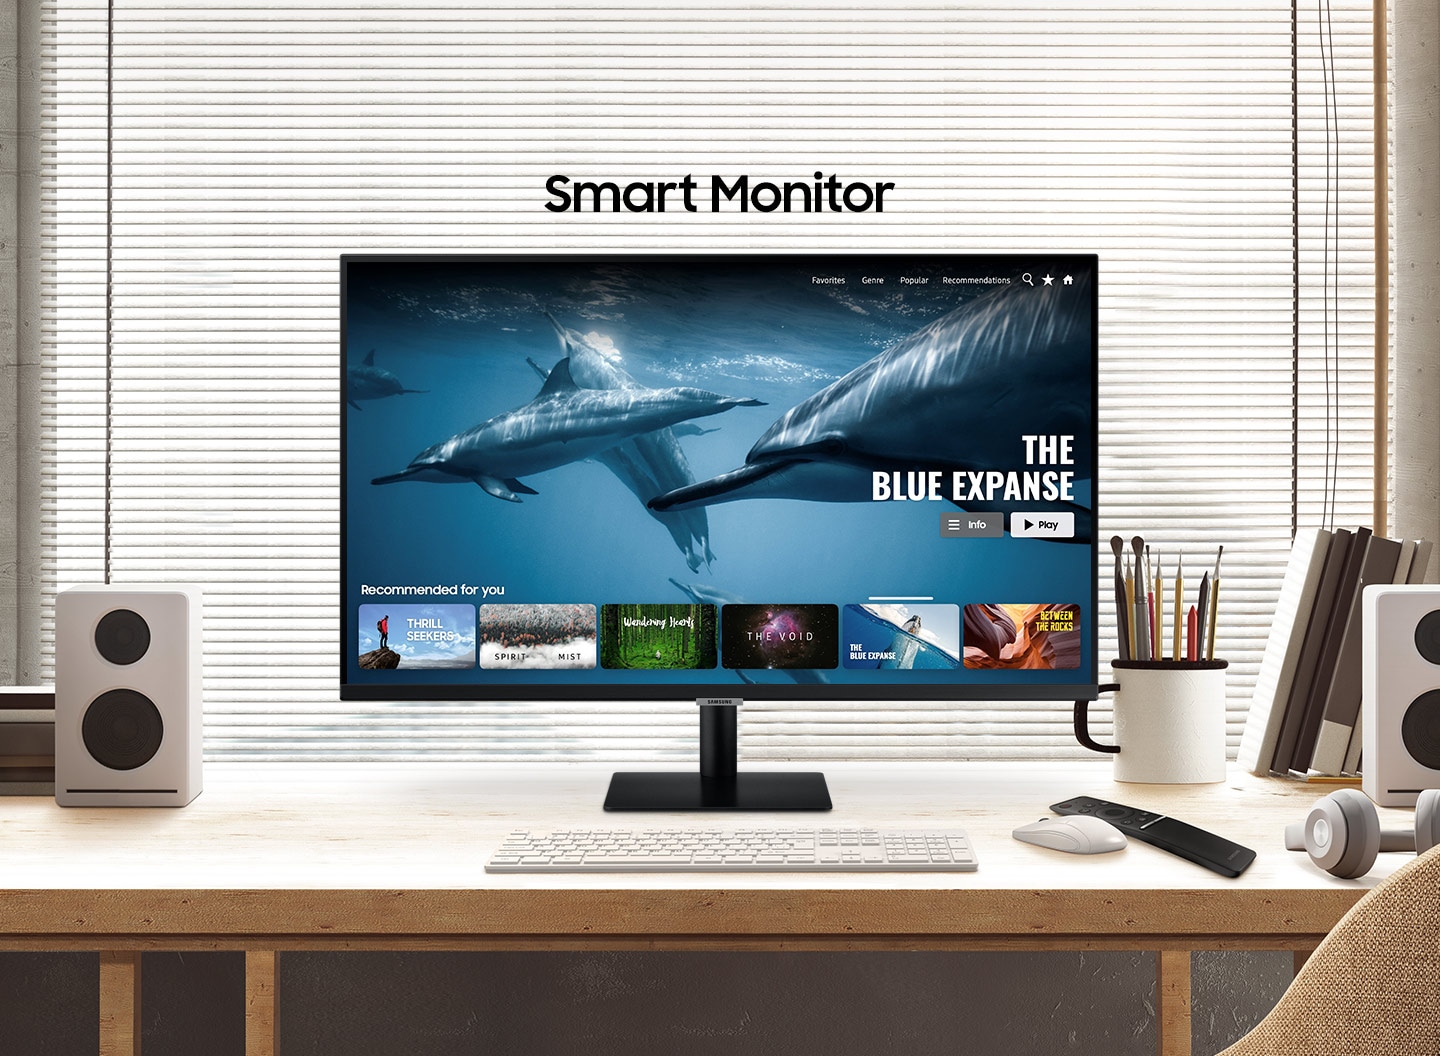 An image of a Smart Monitor with a vertical line which divides two different images of the monitor.